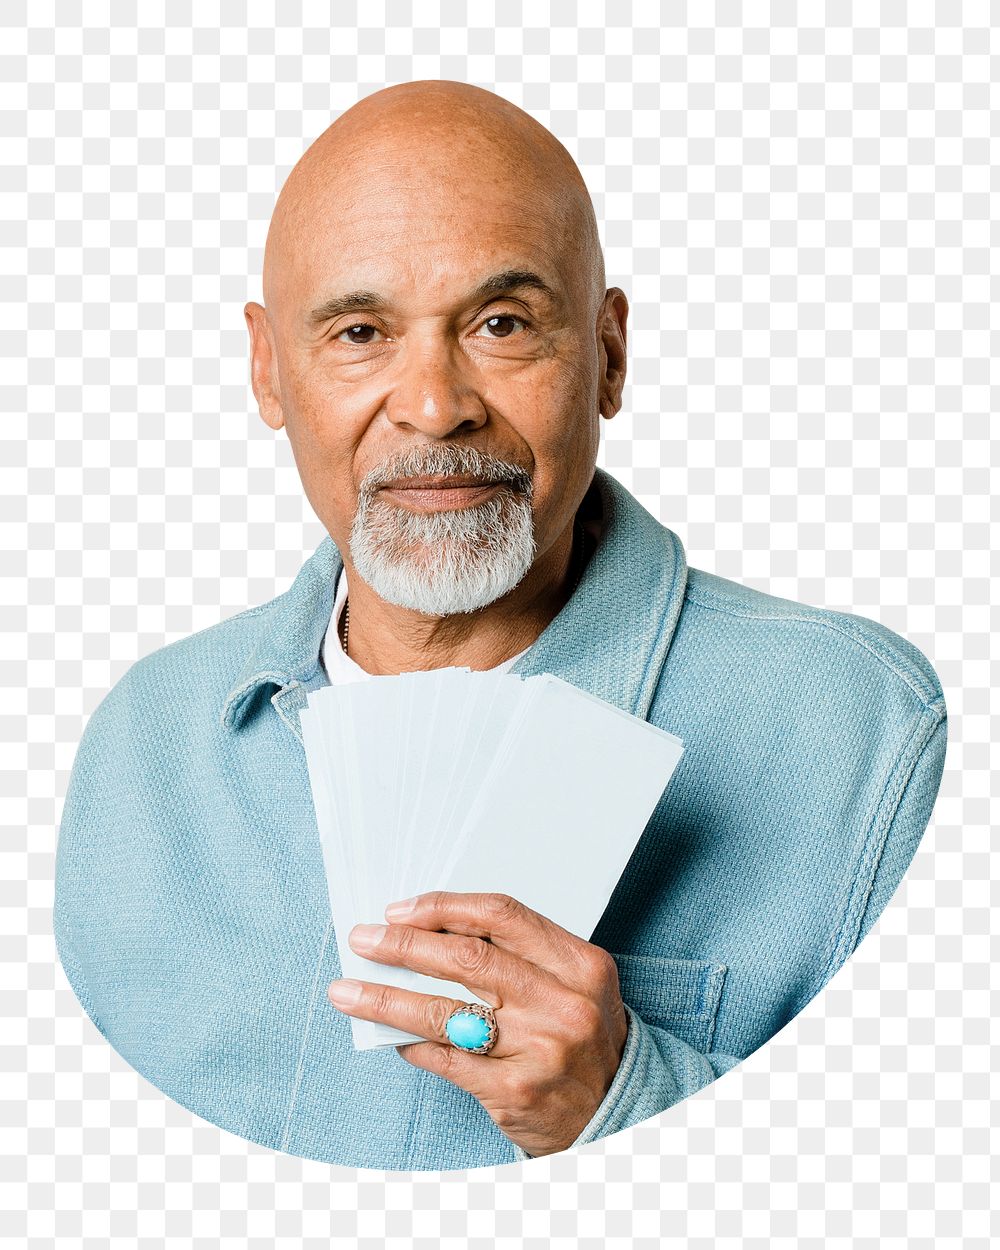 Retired man png holding papers, transparent background